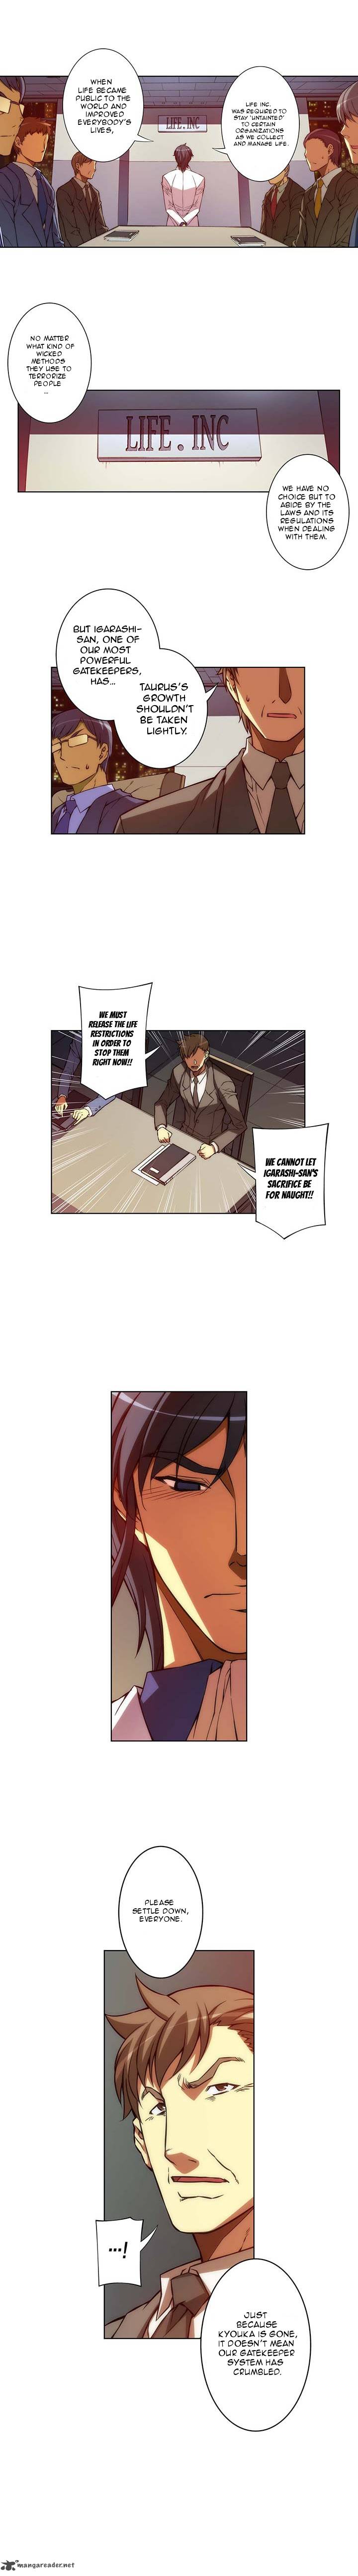 Rebirth 2 The Life Taker Chapter 3 Page 6